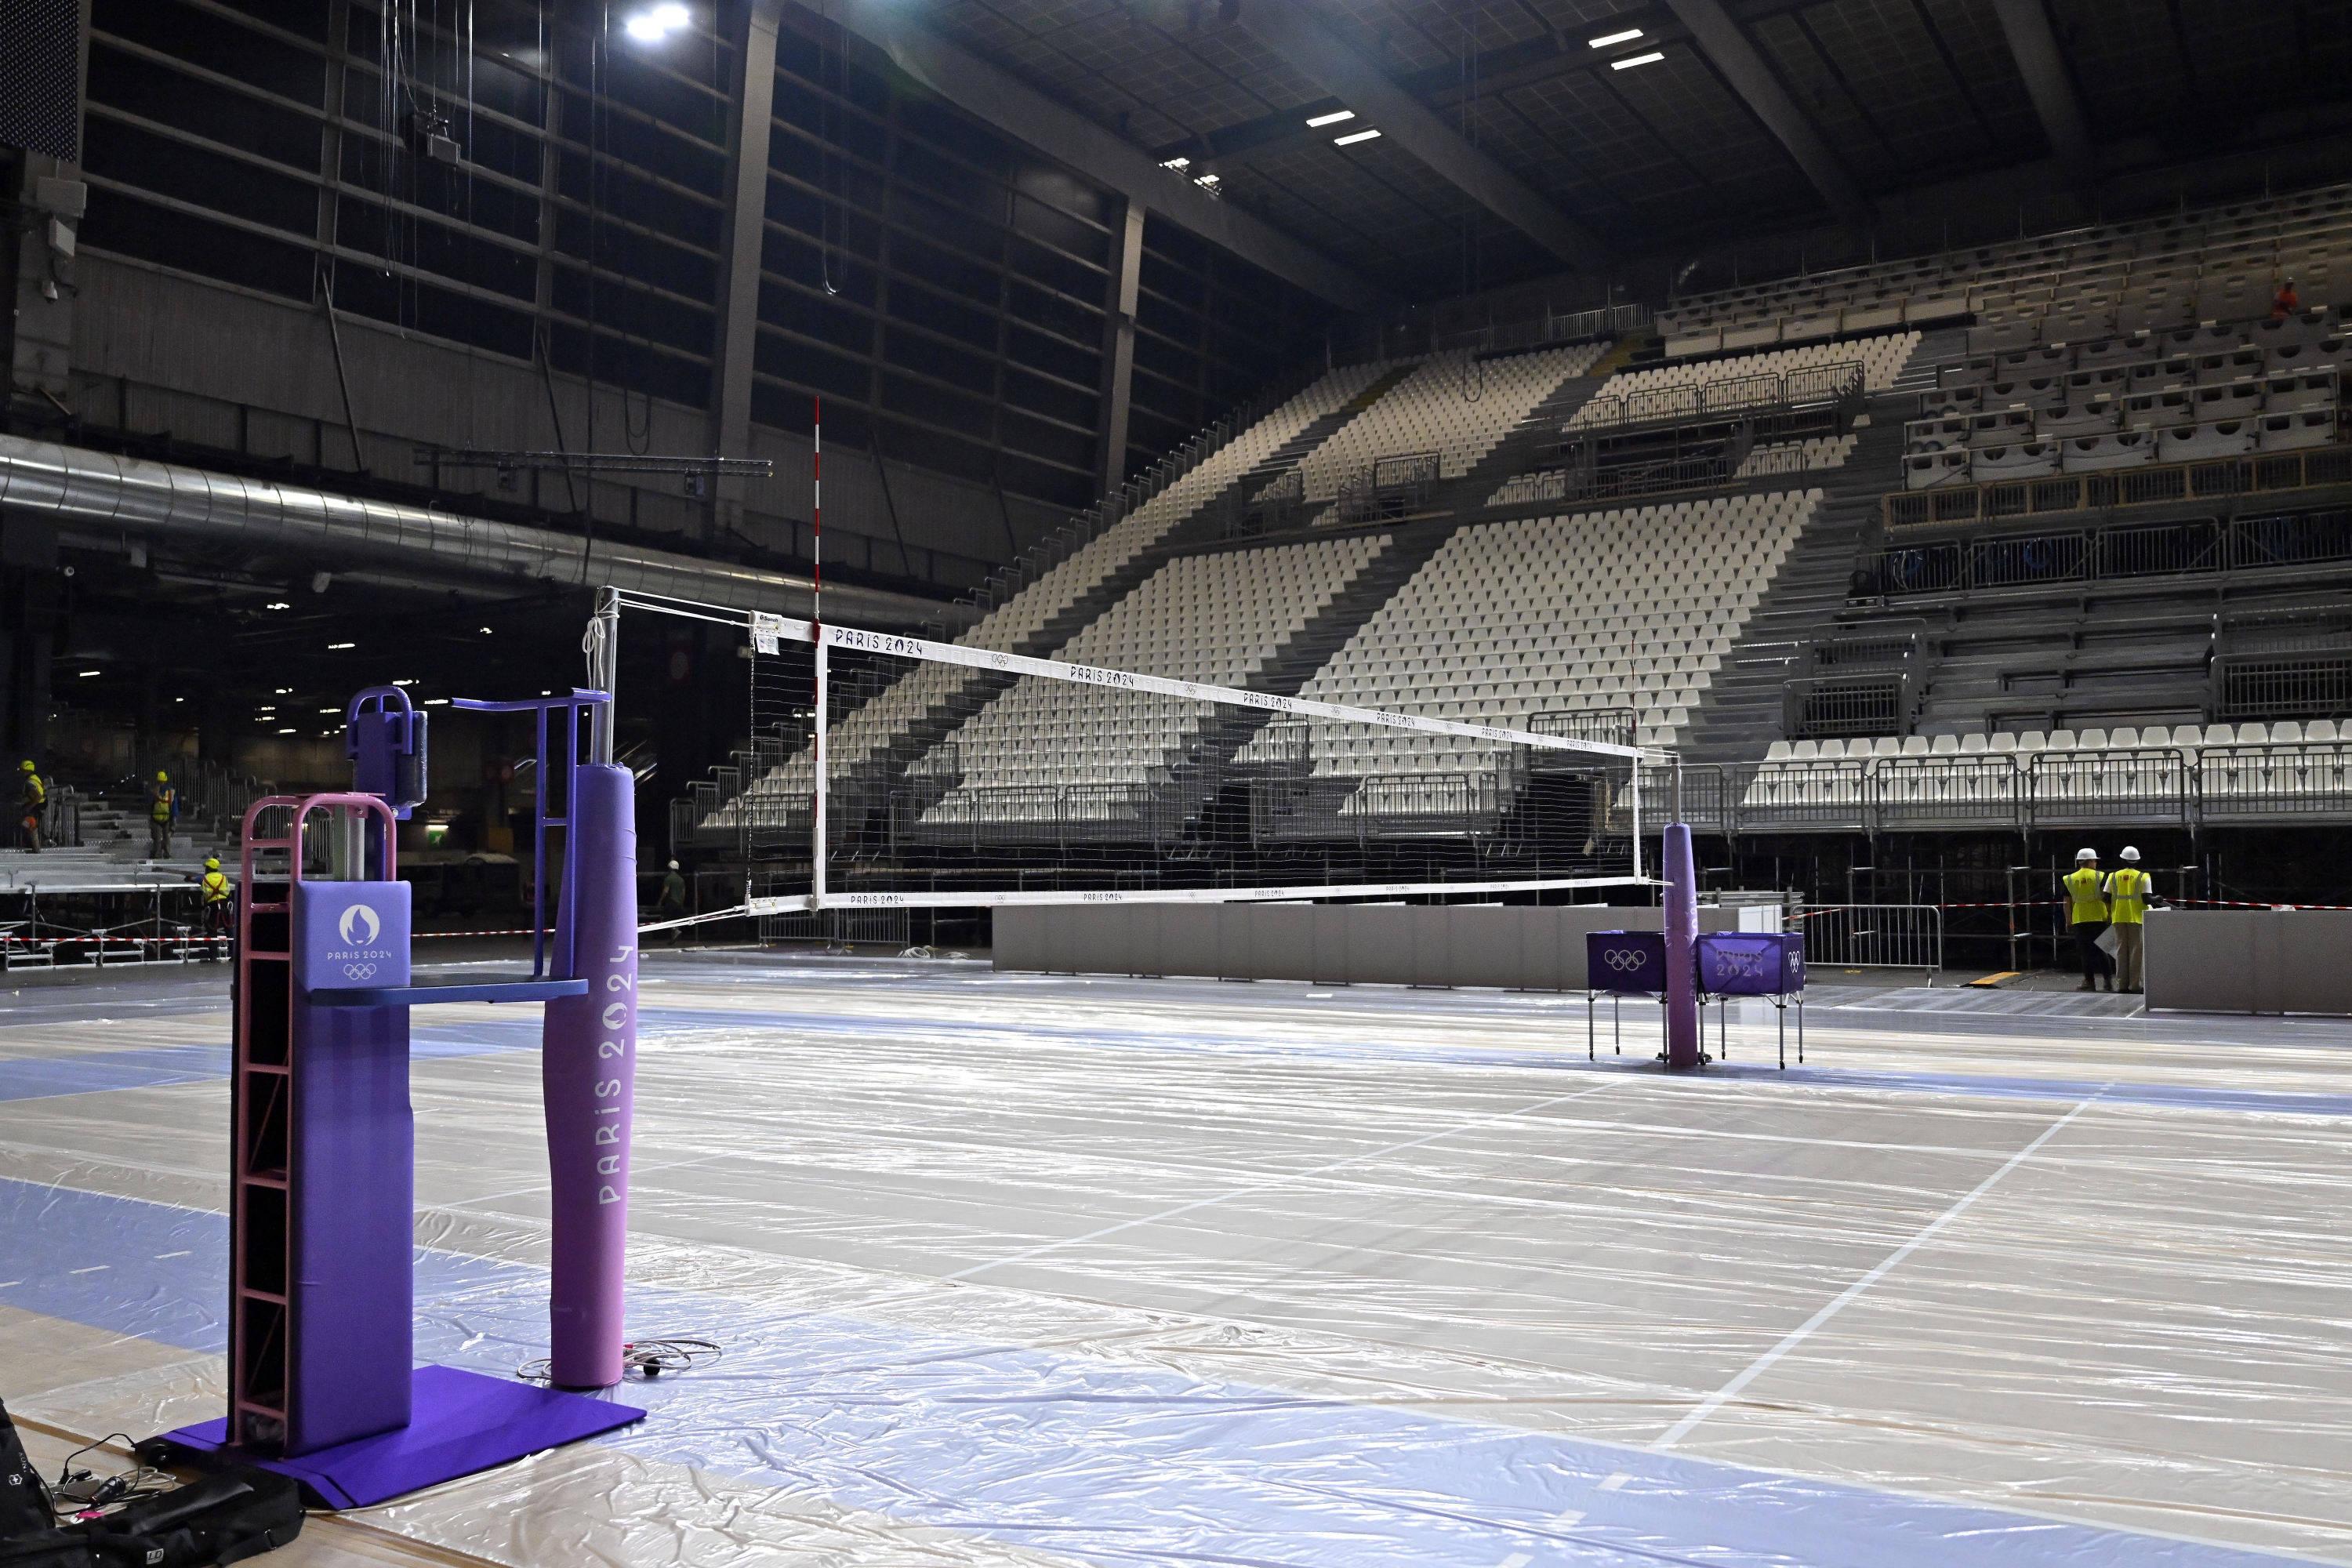 PARIS, FRANCE - JULY 11: A general view inside the volley-ball court during the media visit of Paris 2024 South Arena on July 11, 2024 in Paris, France. (Photo by Aurelien Meunier/Getty Images)